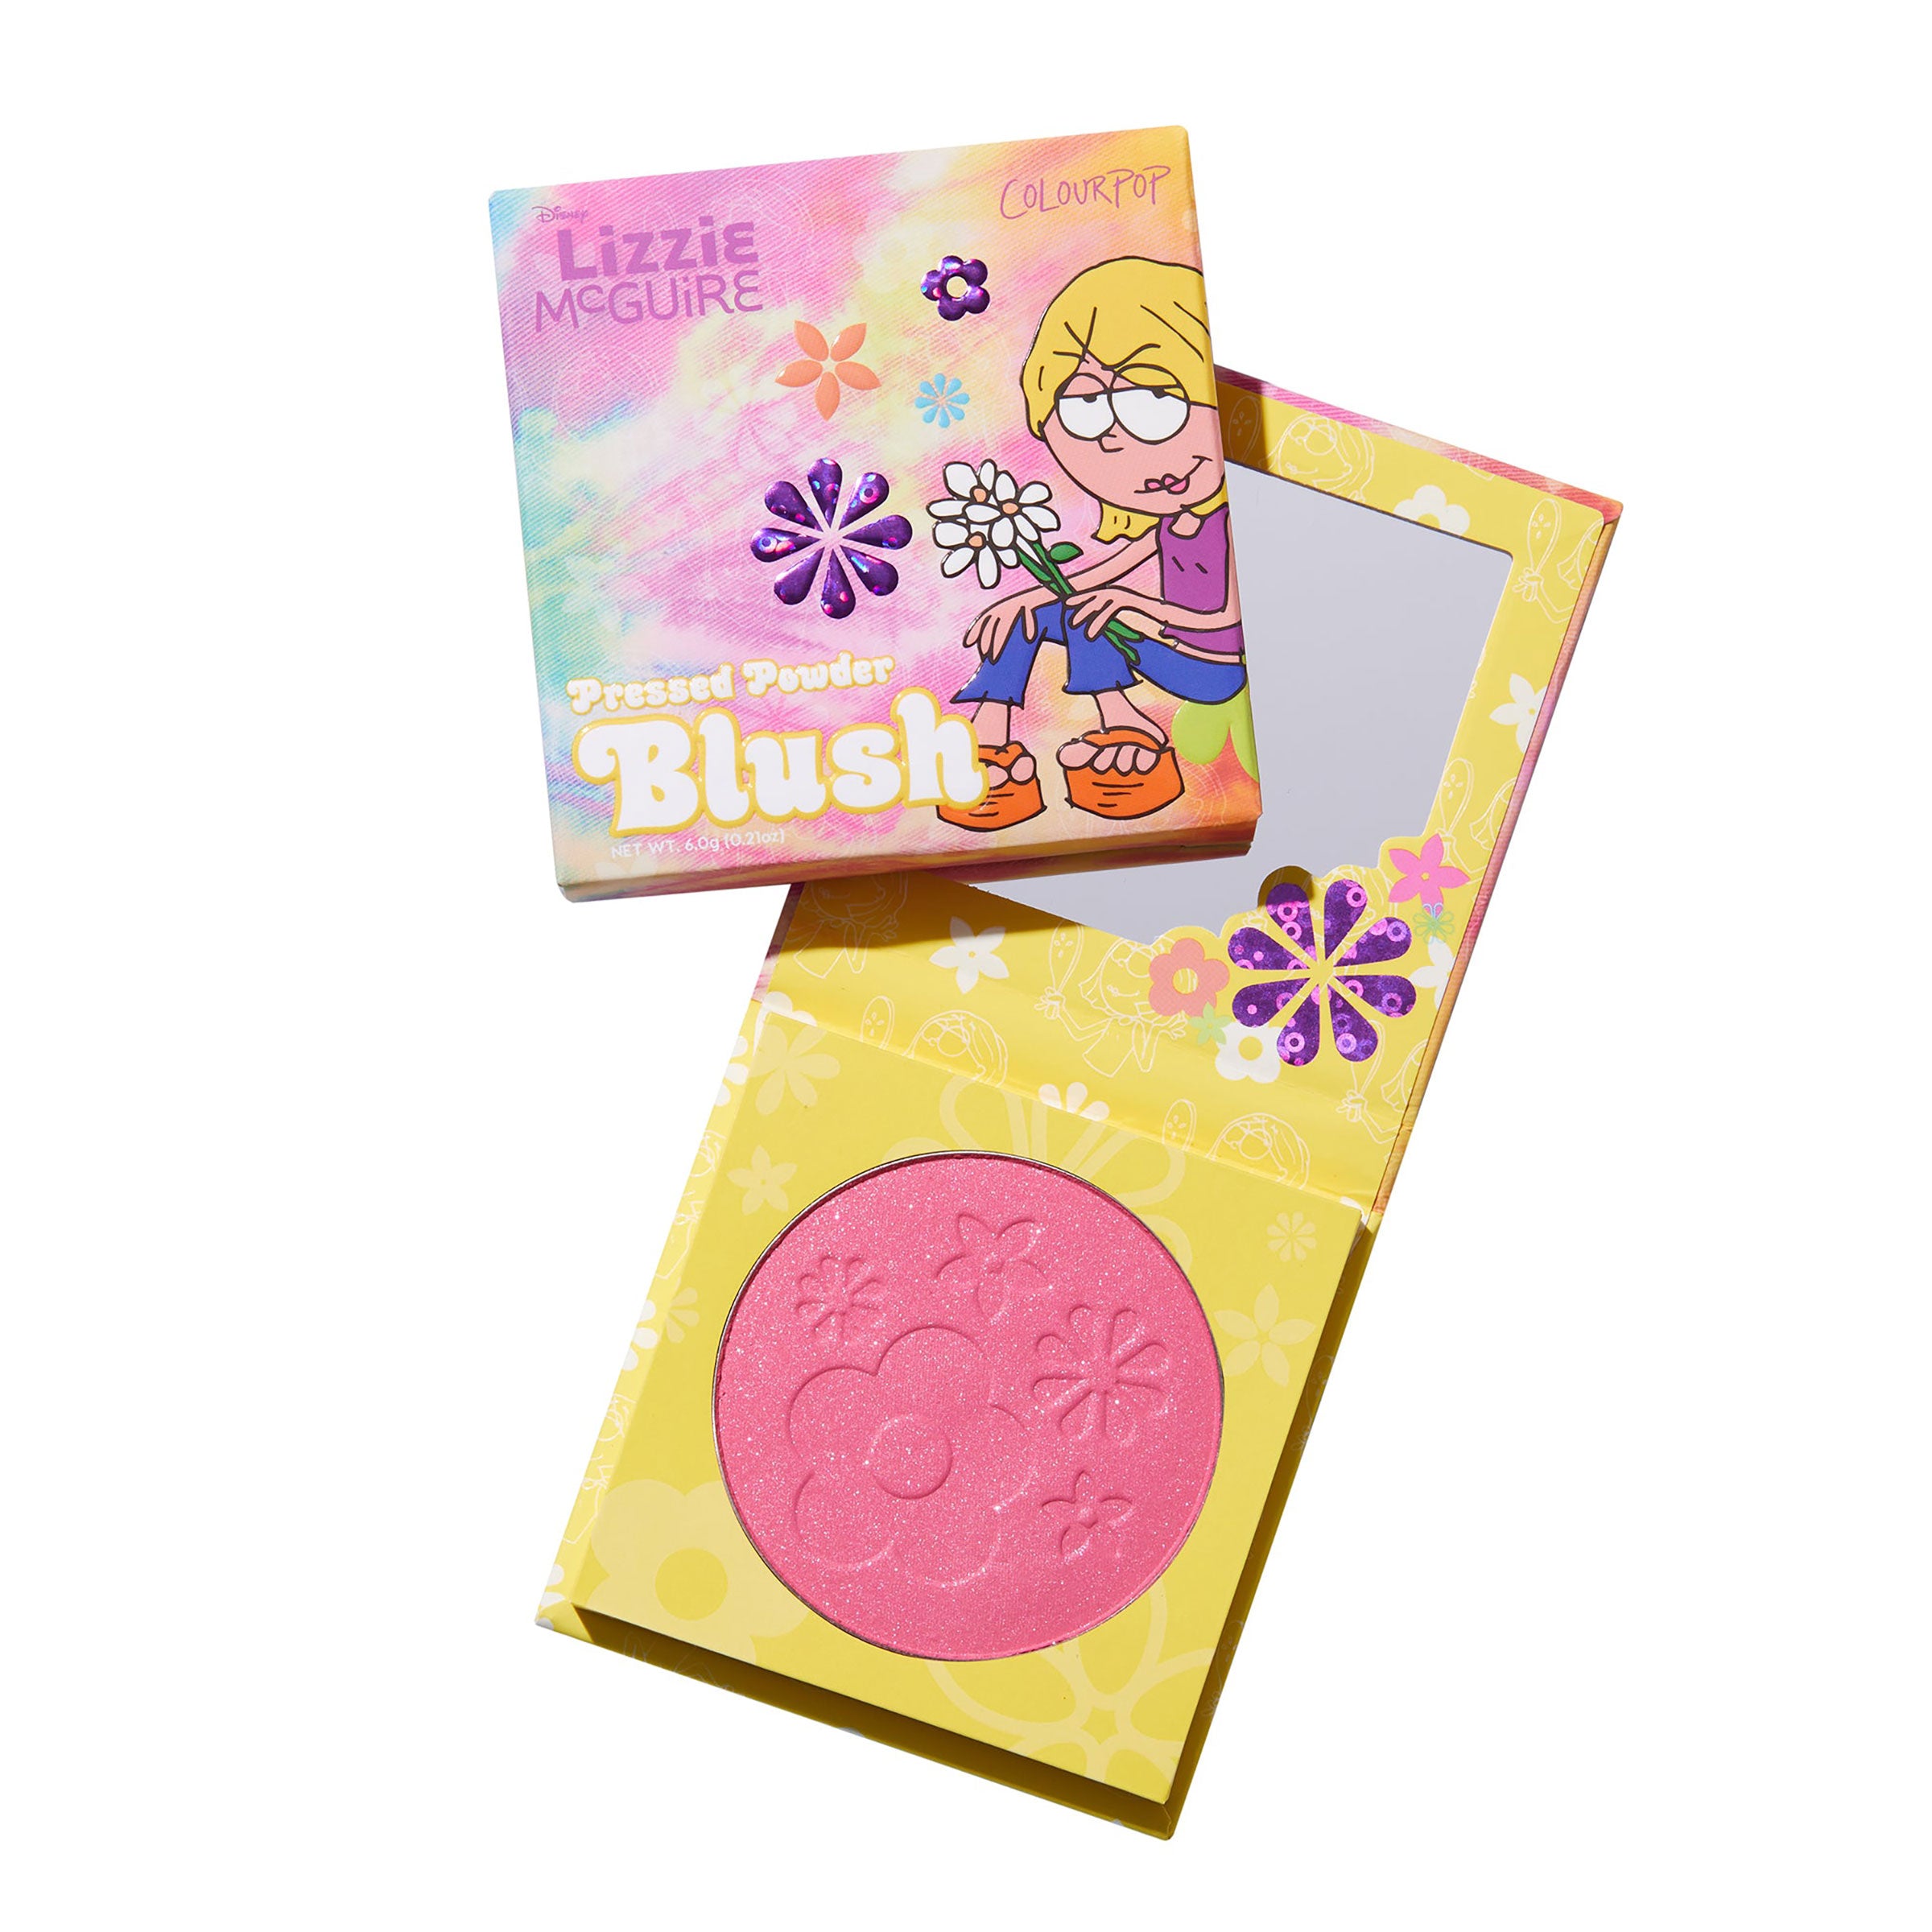 You Are Magnifico Pressed Powder Blush Cool-toned hot pink blush with a satin finish